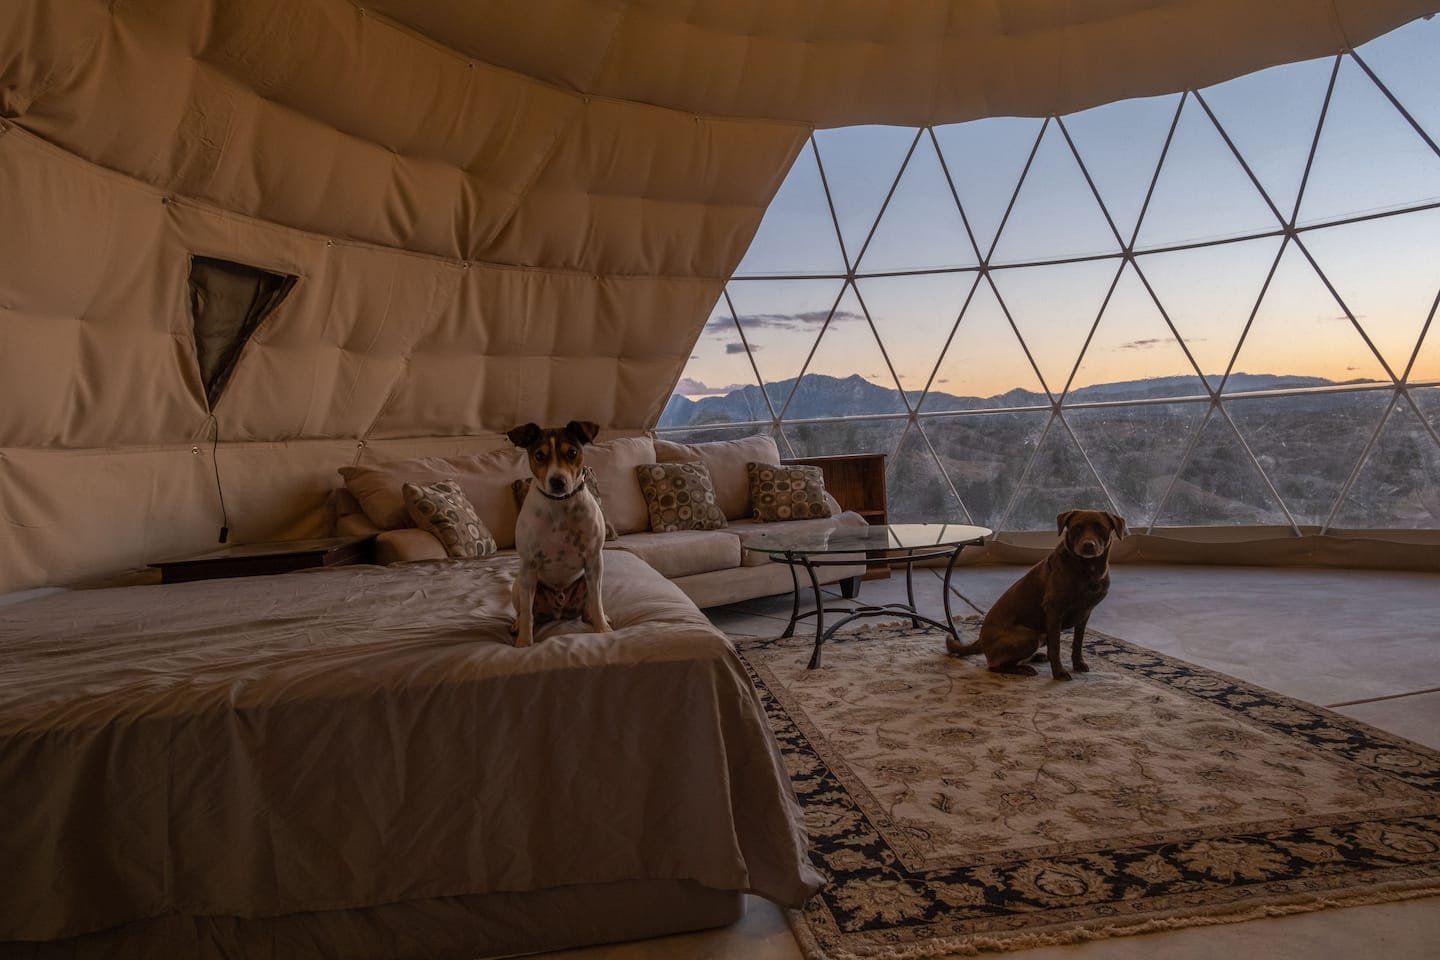  Get ready for the  ultimate desert glamping experience  with a 360-degree mountain view. Enjoy the panoramic sunset from the comfort of your bed.    Typical starting price: $199    Location: Santa Fe, New Mexico    Sleeps: 2 guests    Rating: 4.95  